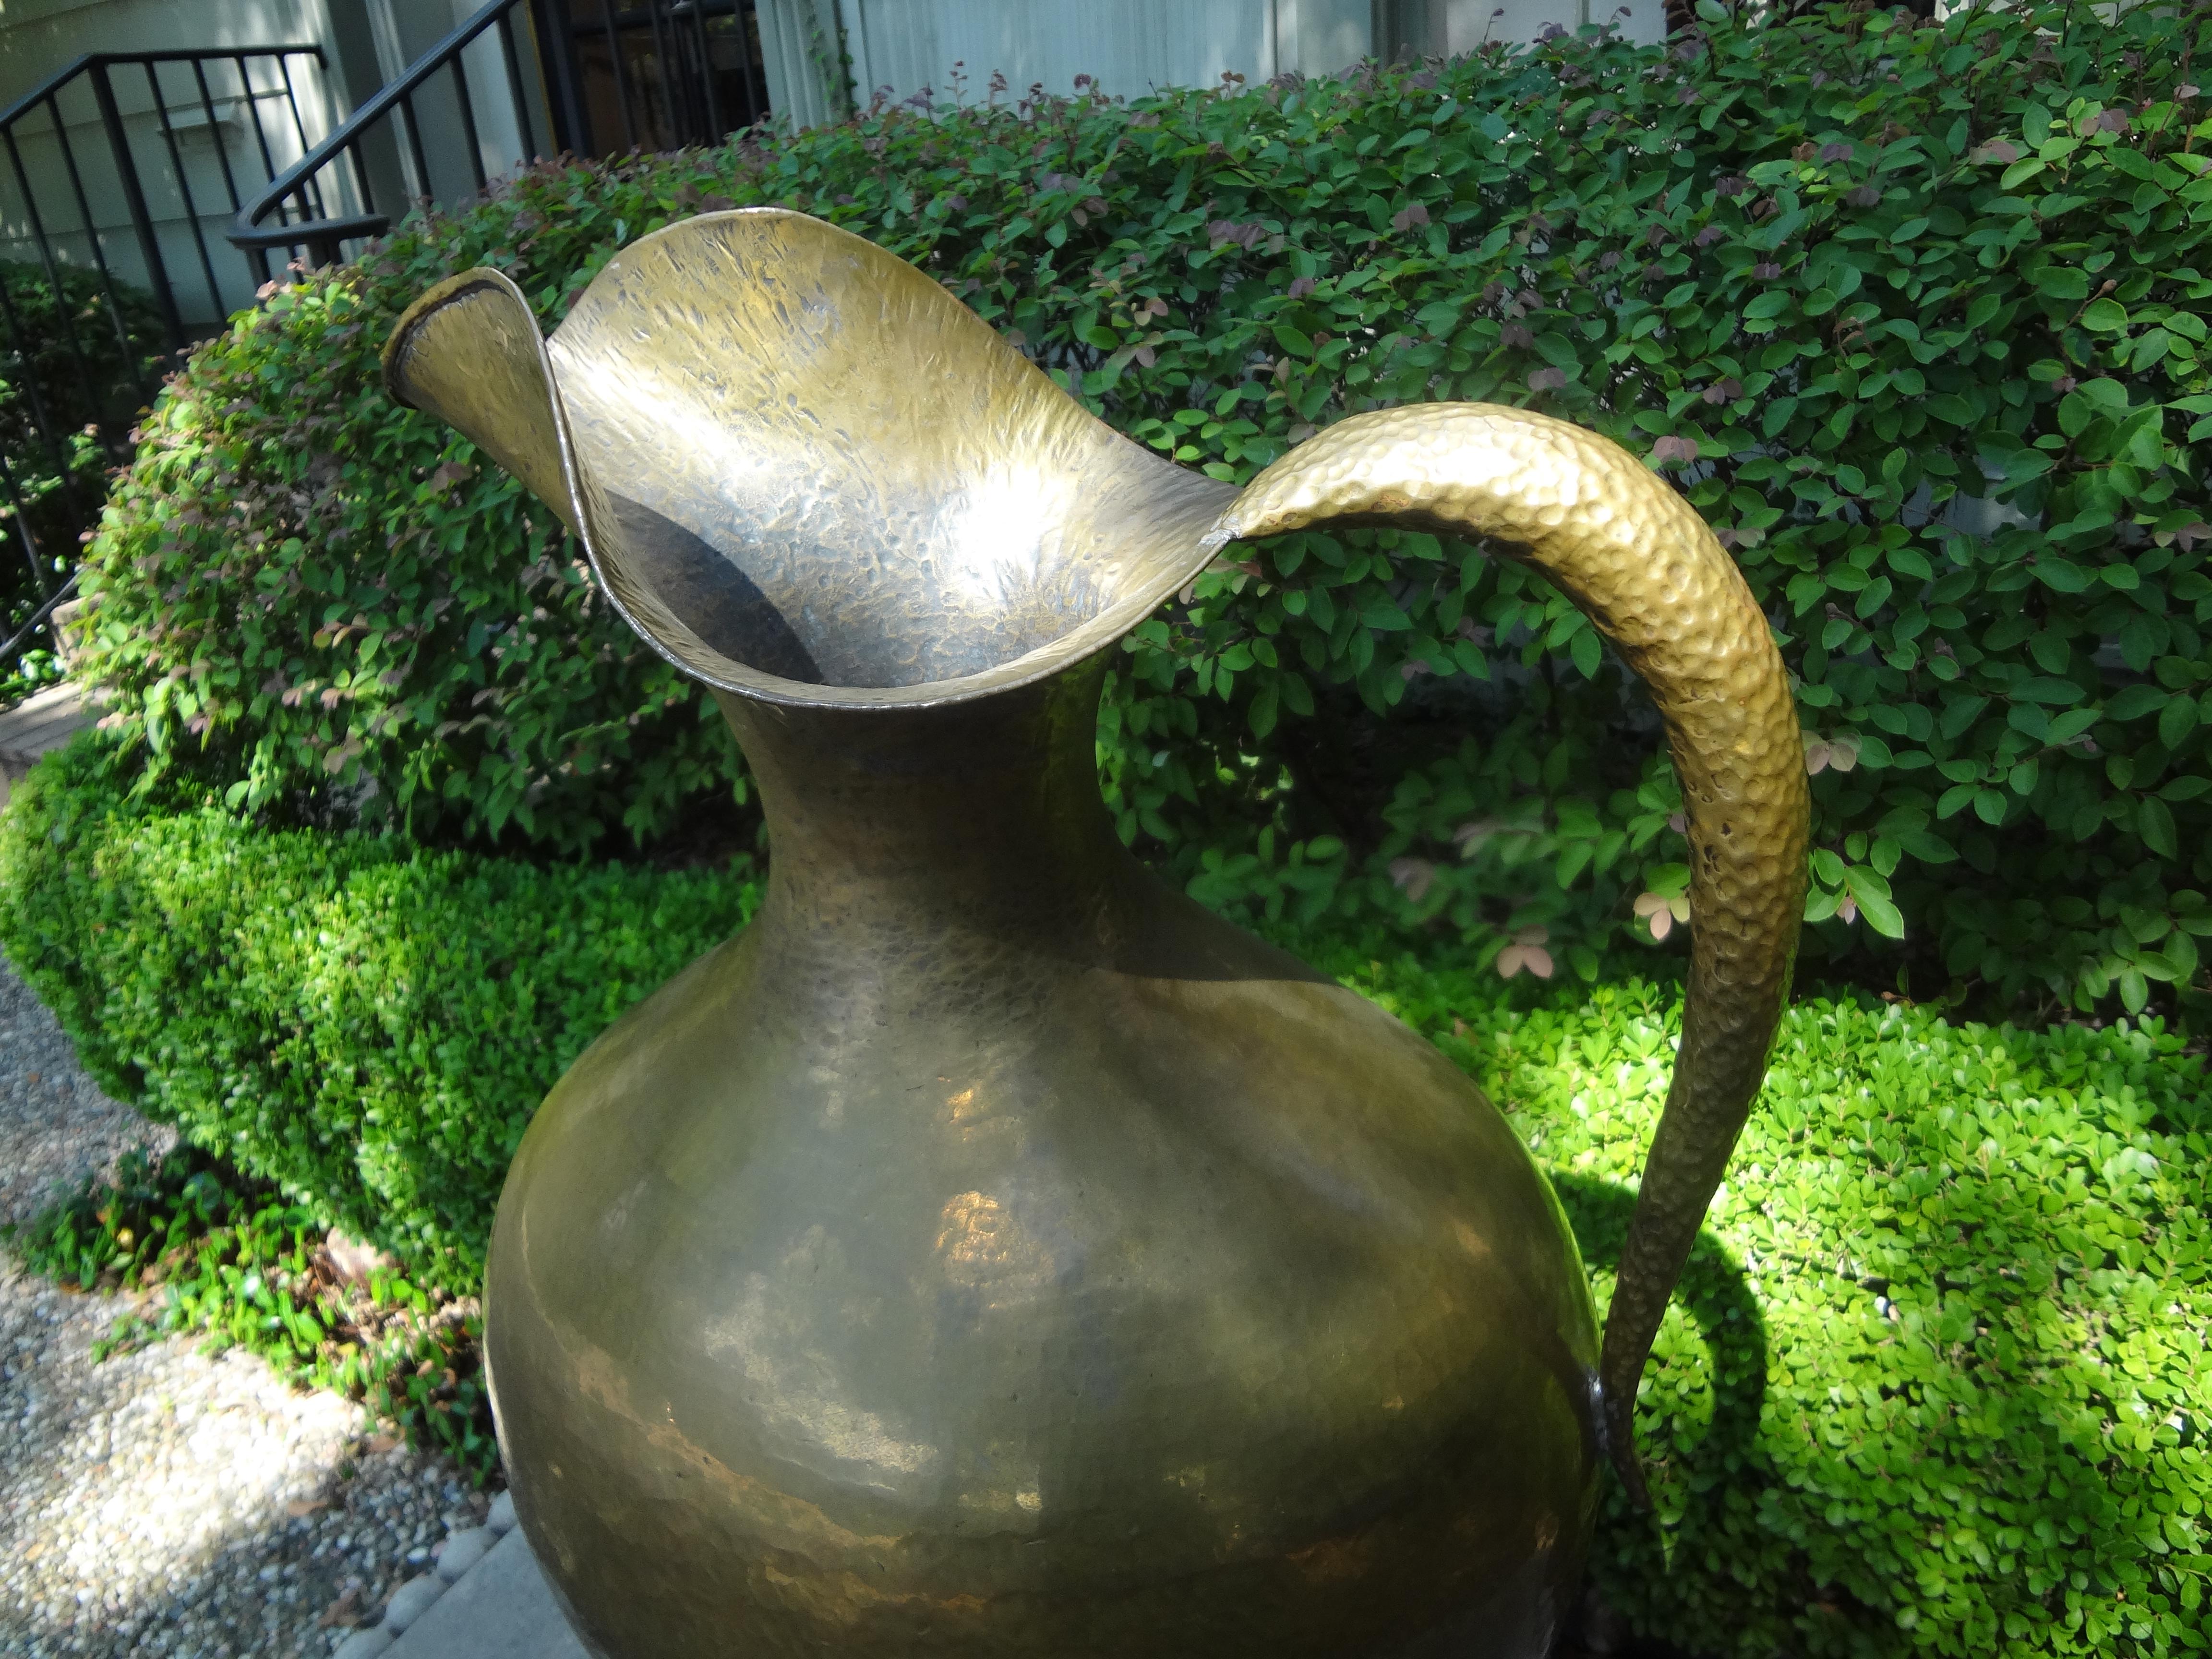 Monumental Italian modernist style hand-hammered ewer or brass pitcher stamped Egidio Casagrande, circa 1940.
This sculptural piece has a beautiful naturally occurring soft patina and is stamped with makers mark on the bottom.
A second almost